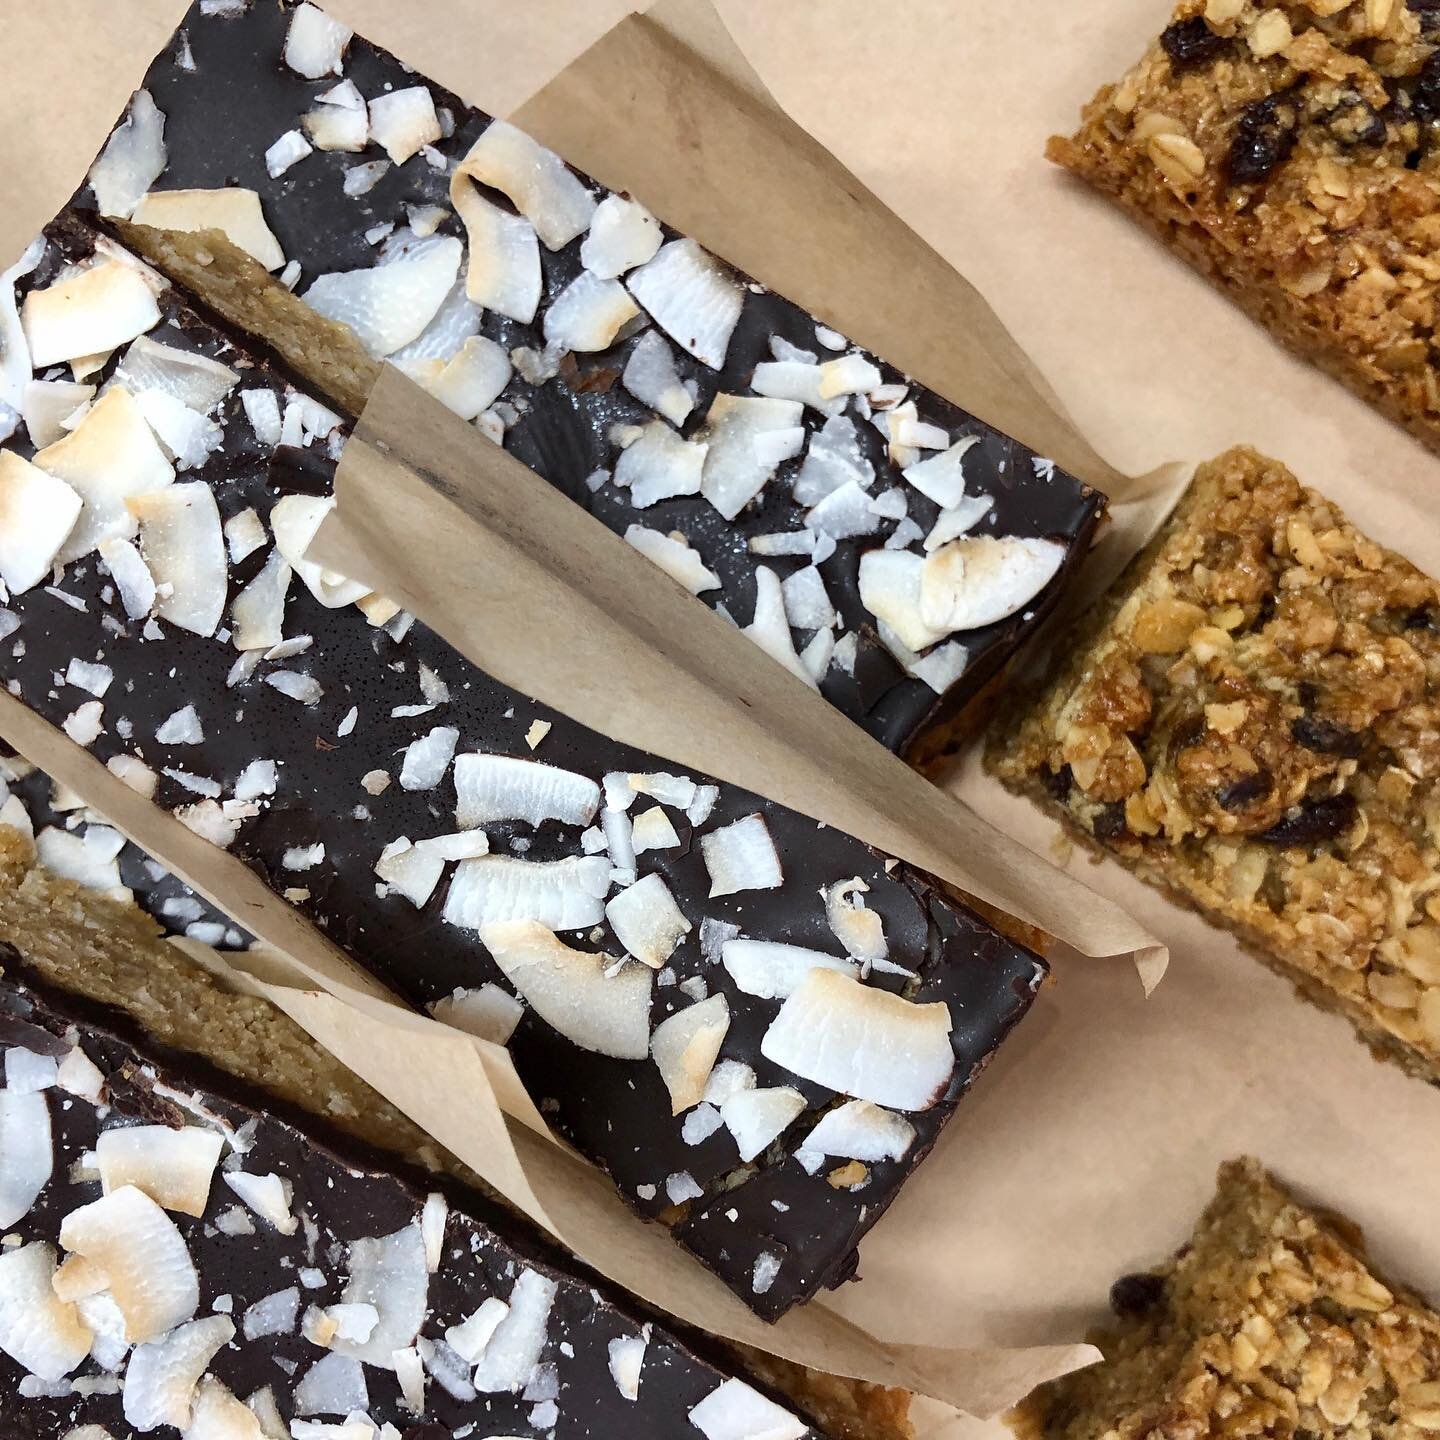 If you&rsquo;re travelling in or out of Paddington this weekend we have some fresh traybakes waiting for you. Pictured is the superseded flapjack which is our favourite.